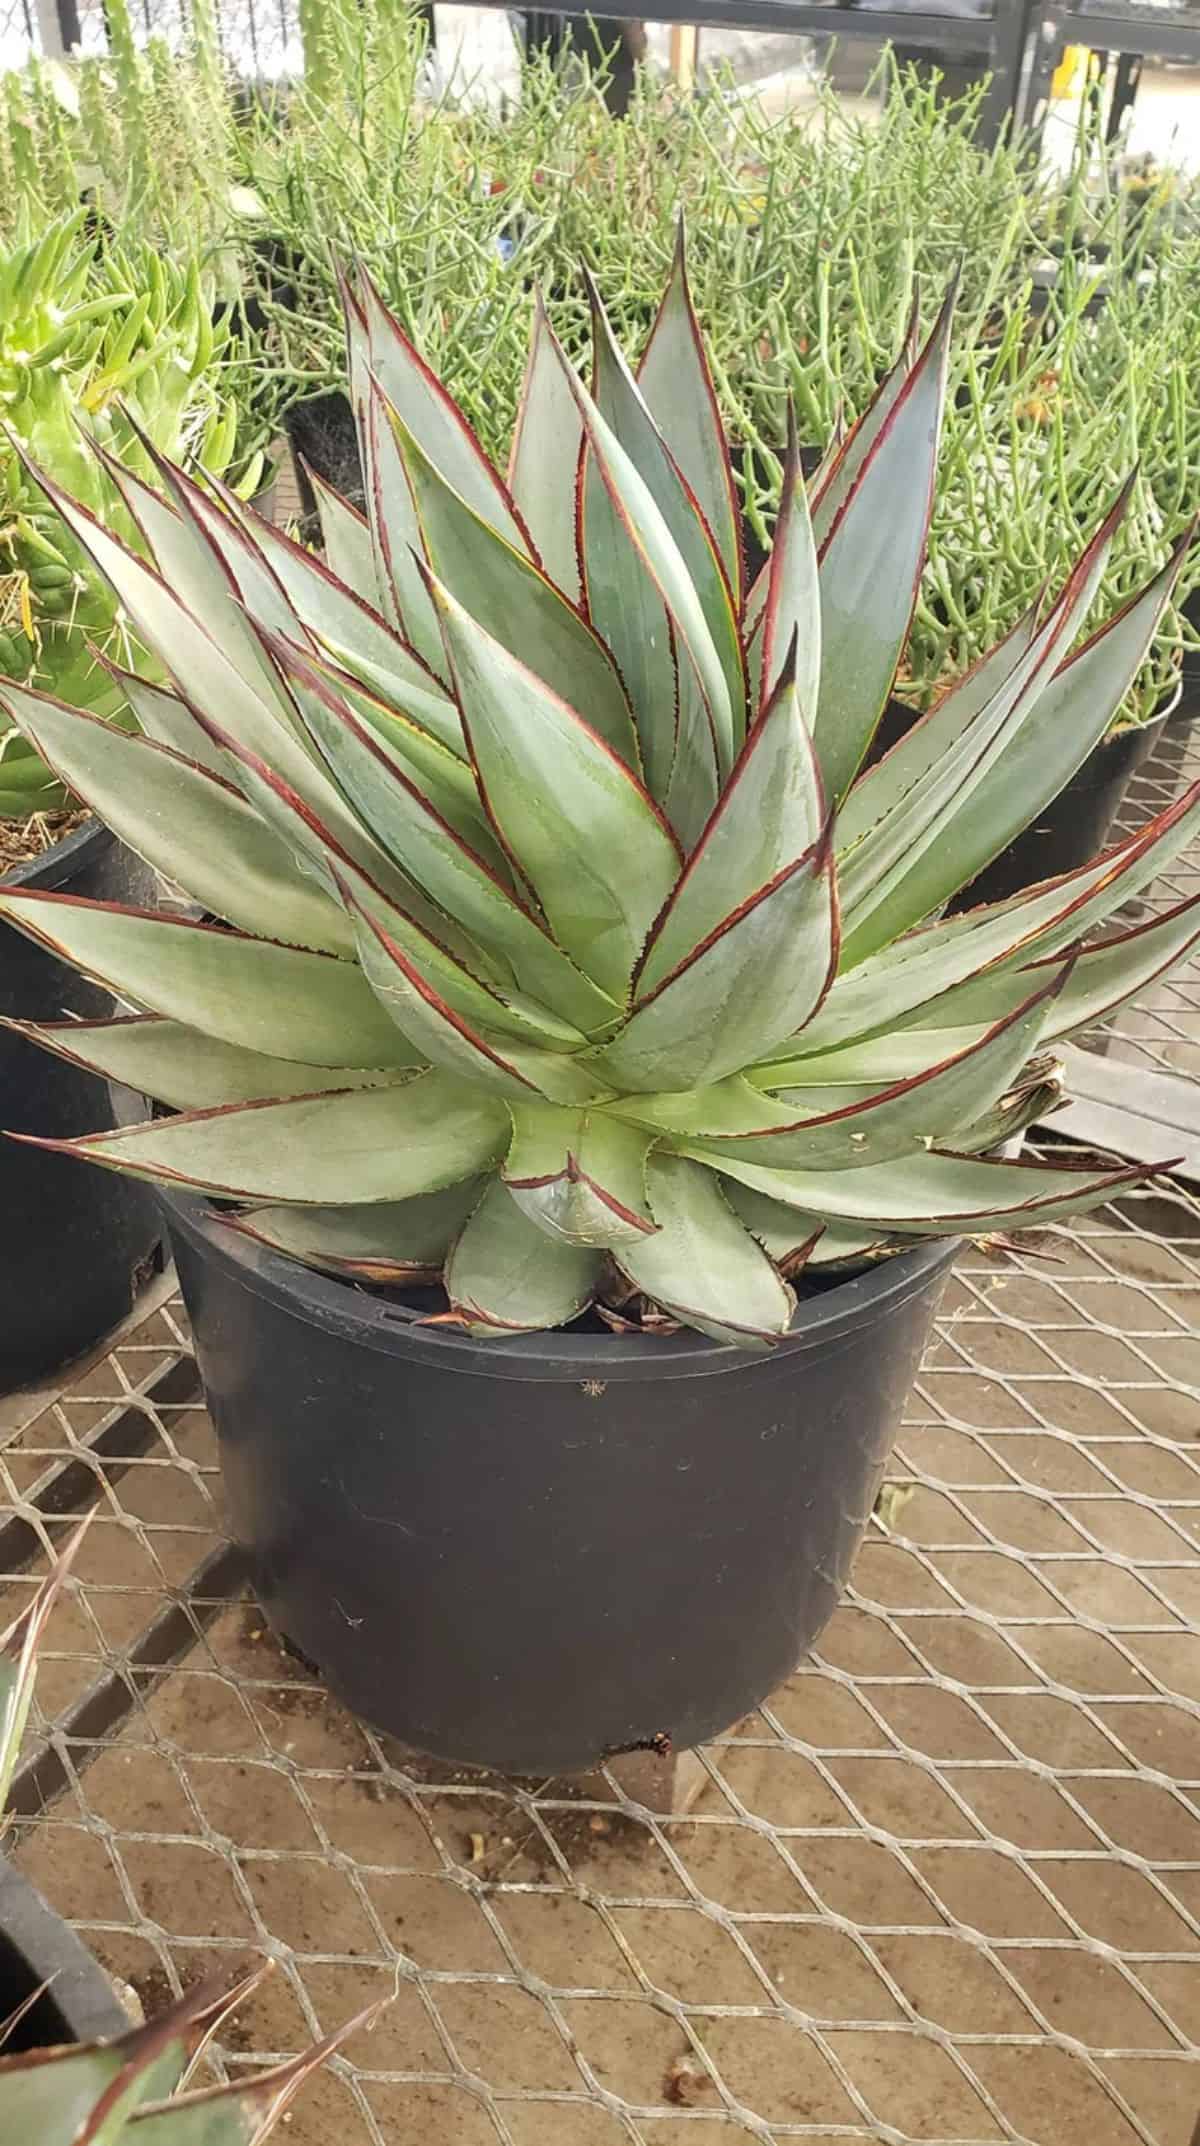 Blue Glow agave in a pot.